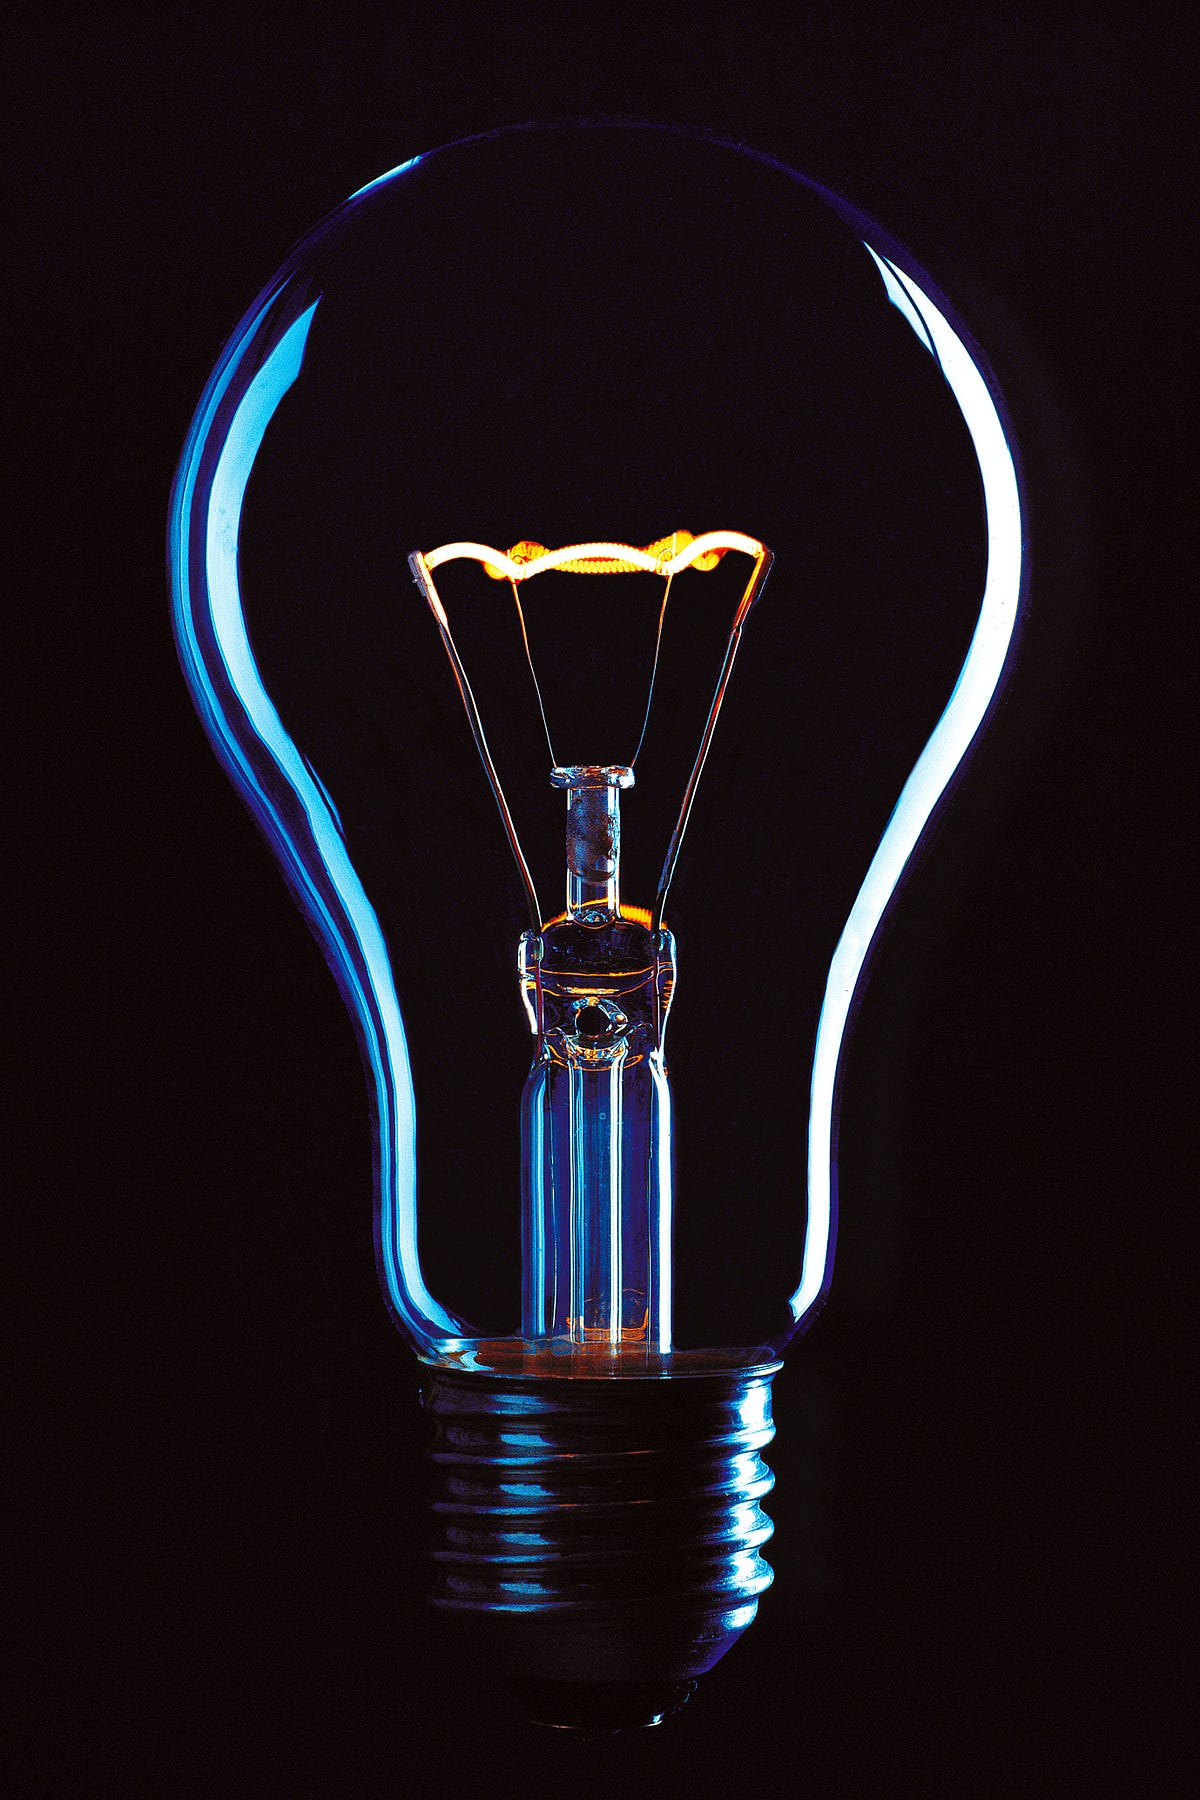 5 Leadership Lessons From Changing a Light Bulb at 2 a.m.